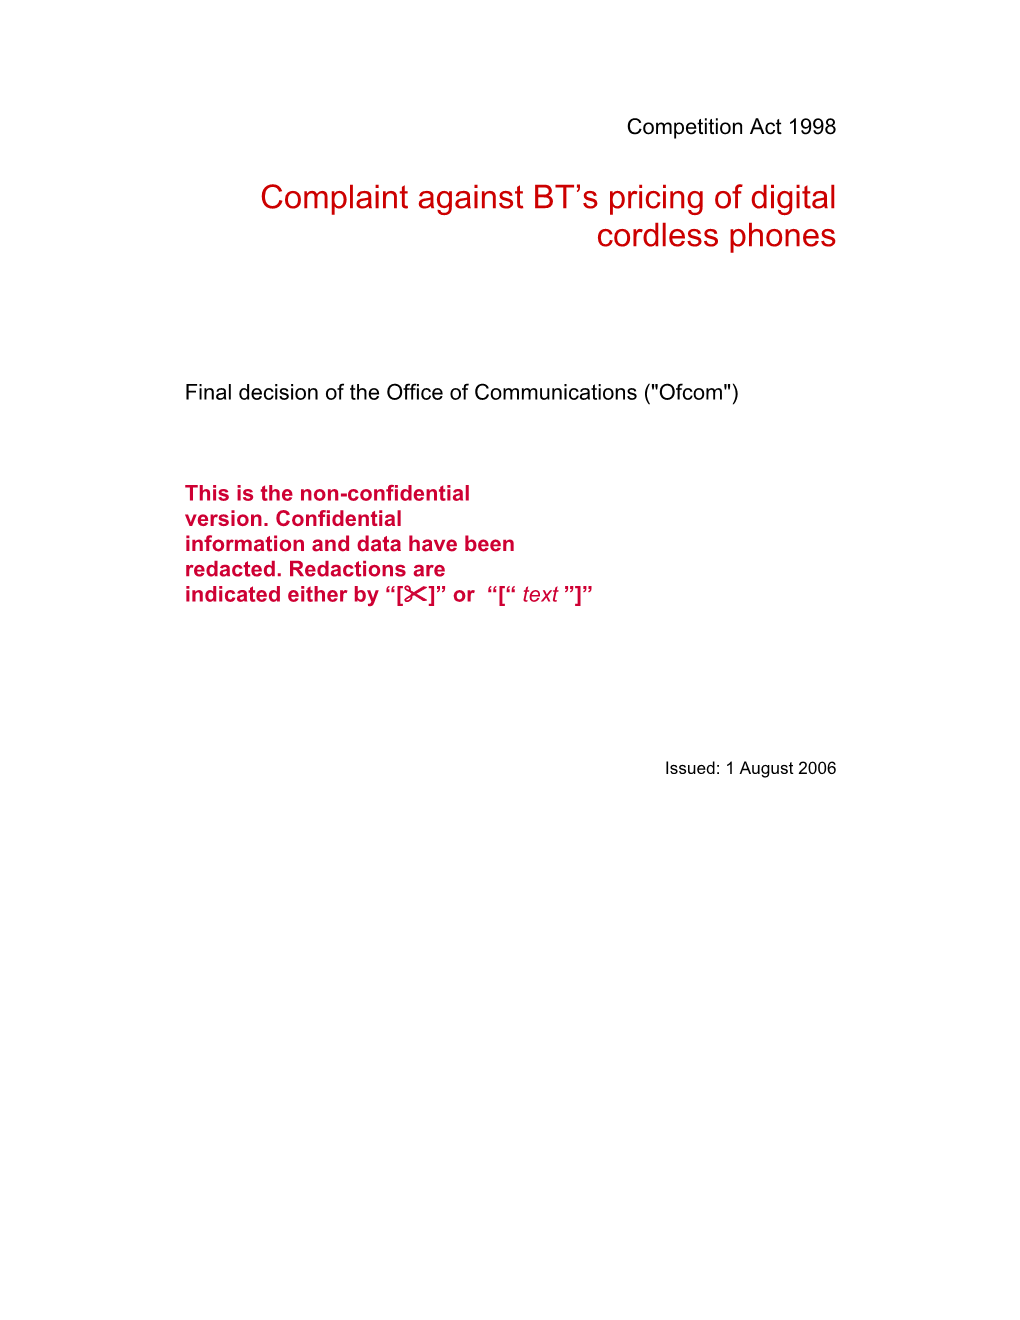 Complaint Against BT's Pricing of Digital Cordless